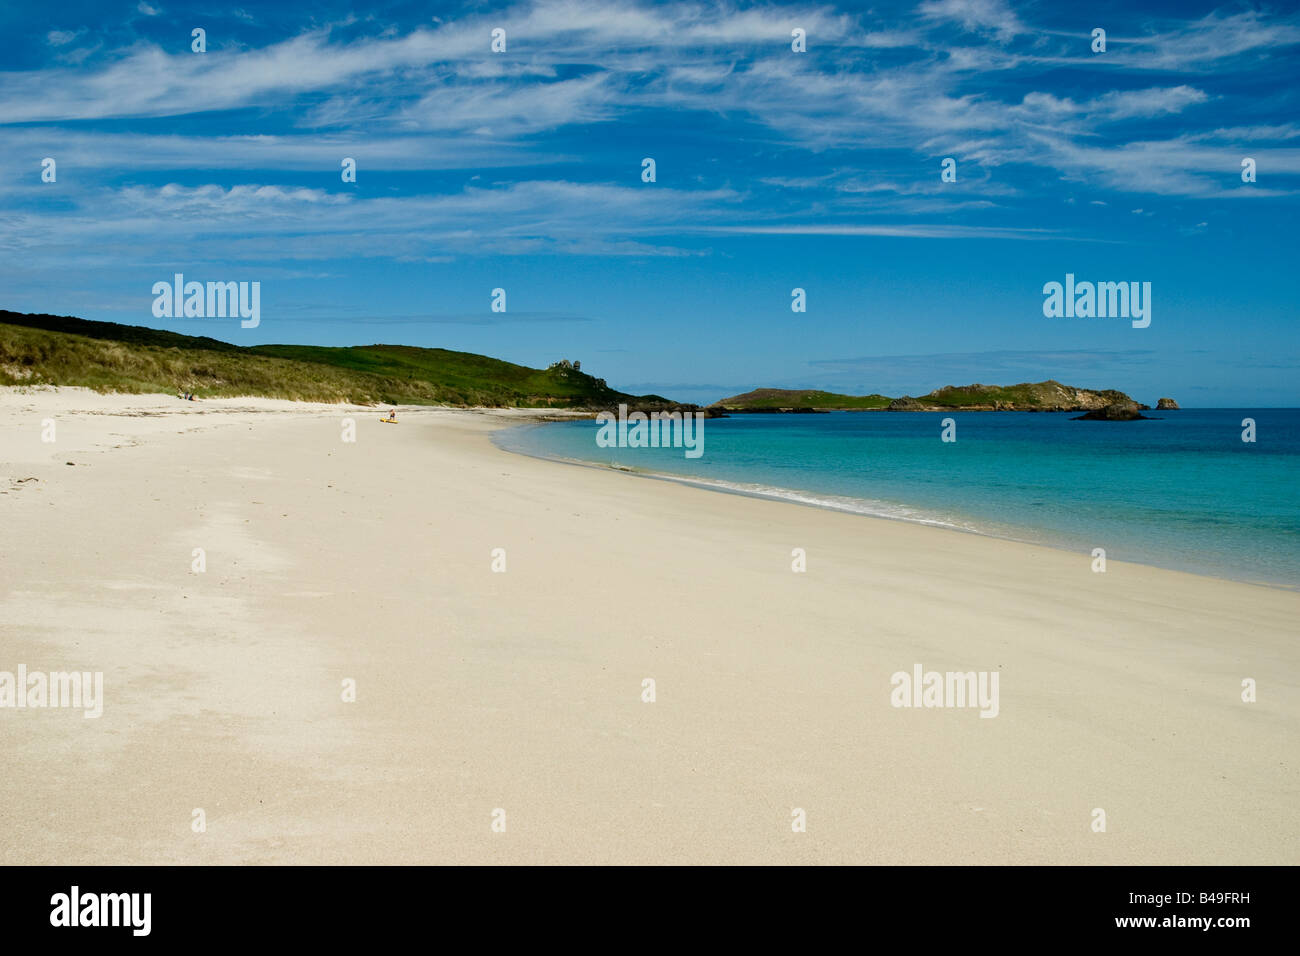 An almost deserted beach, clear skies and crystal clear water typify the beauty of Great Bay, St Martin's, Isles of Scilly Stock Photo